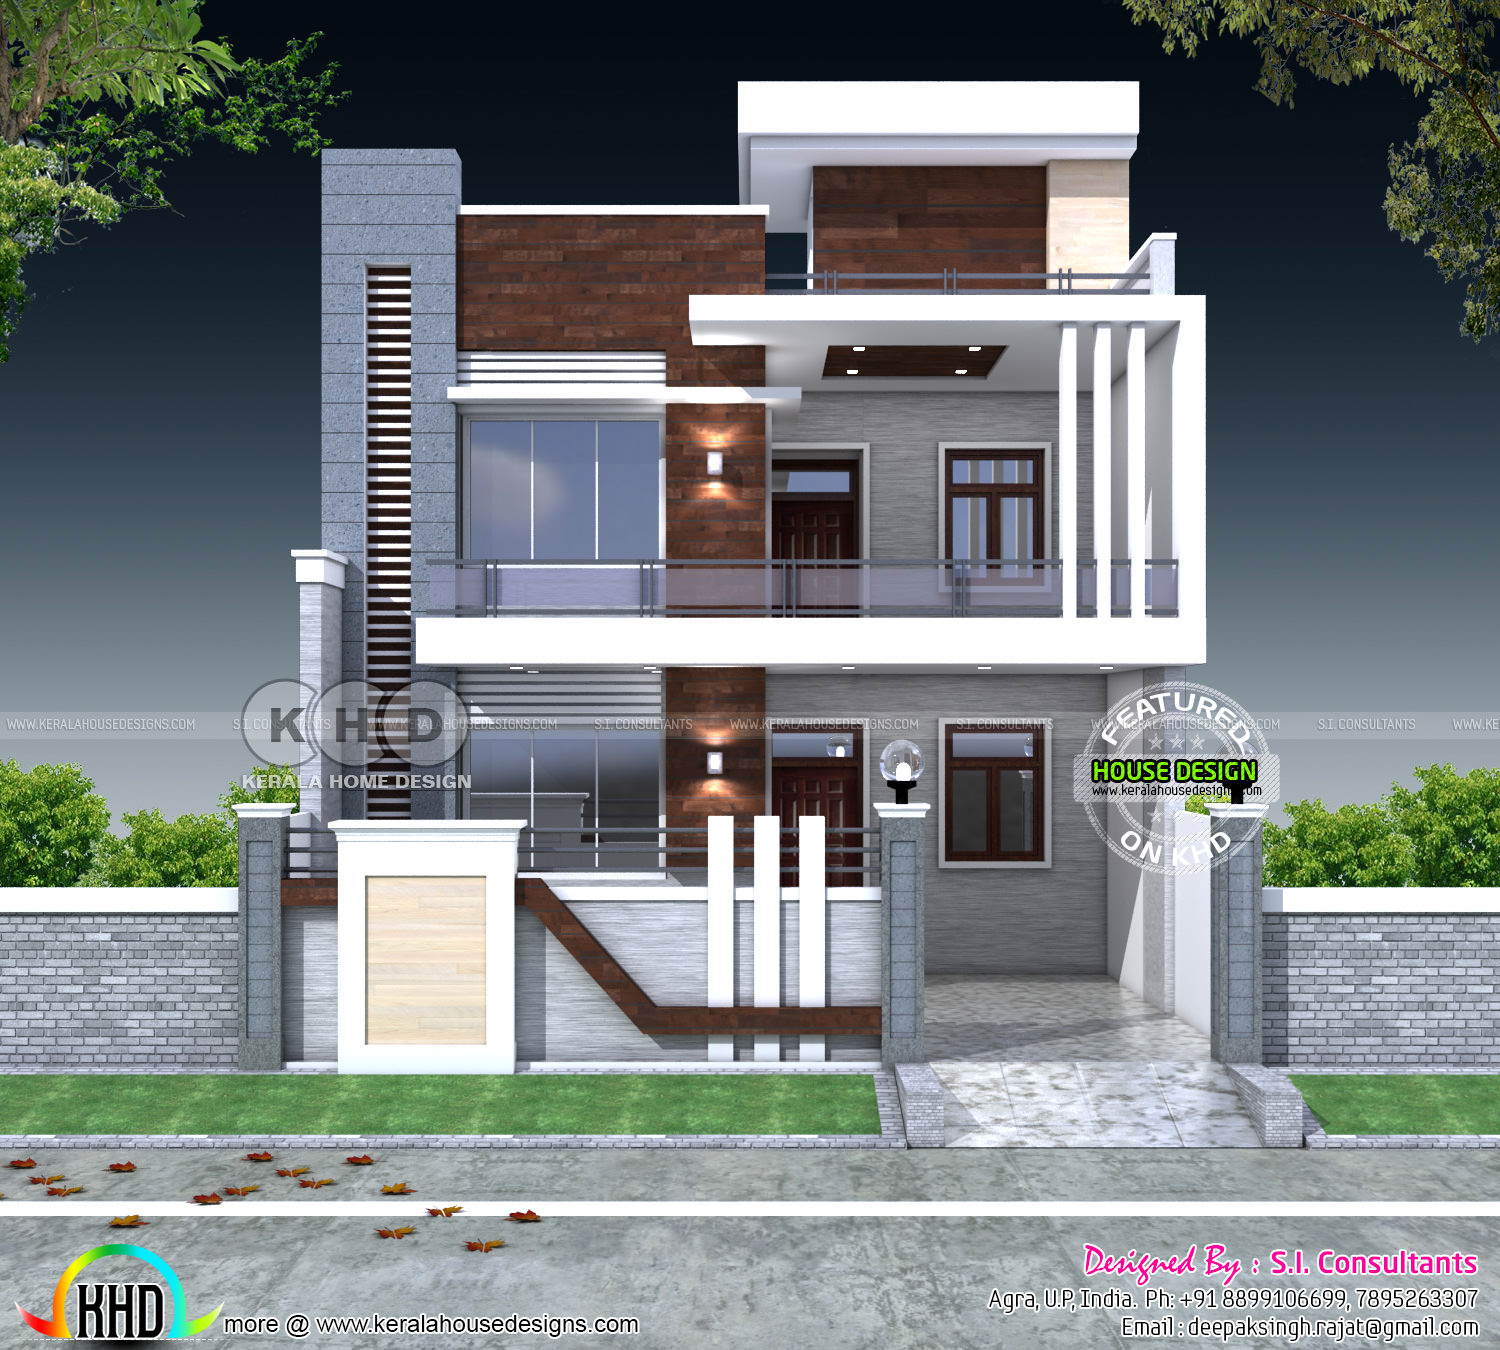 5 bedroom flat roof contemporary India  home  Kerala home  